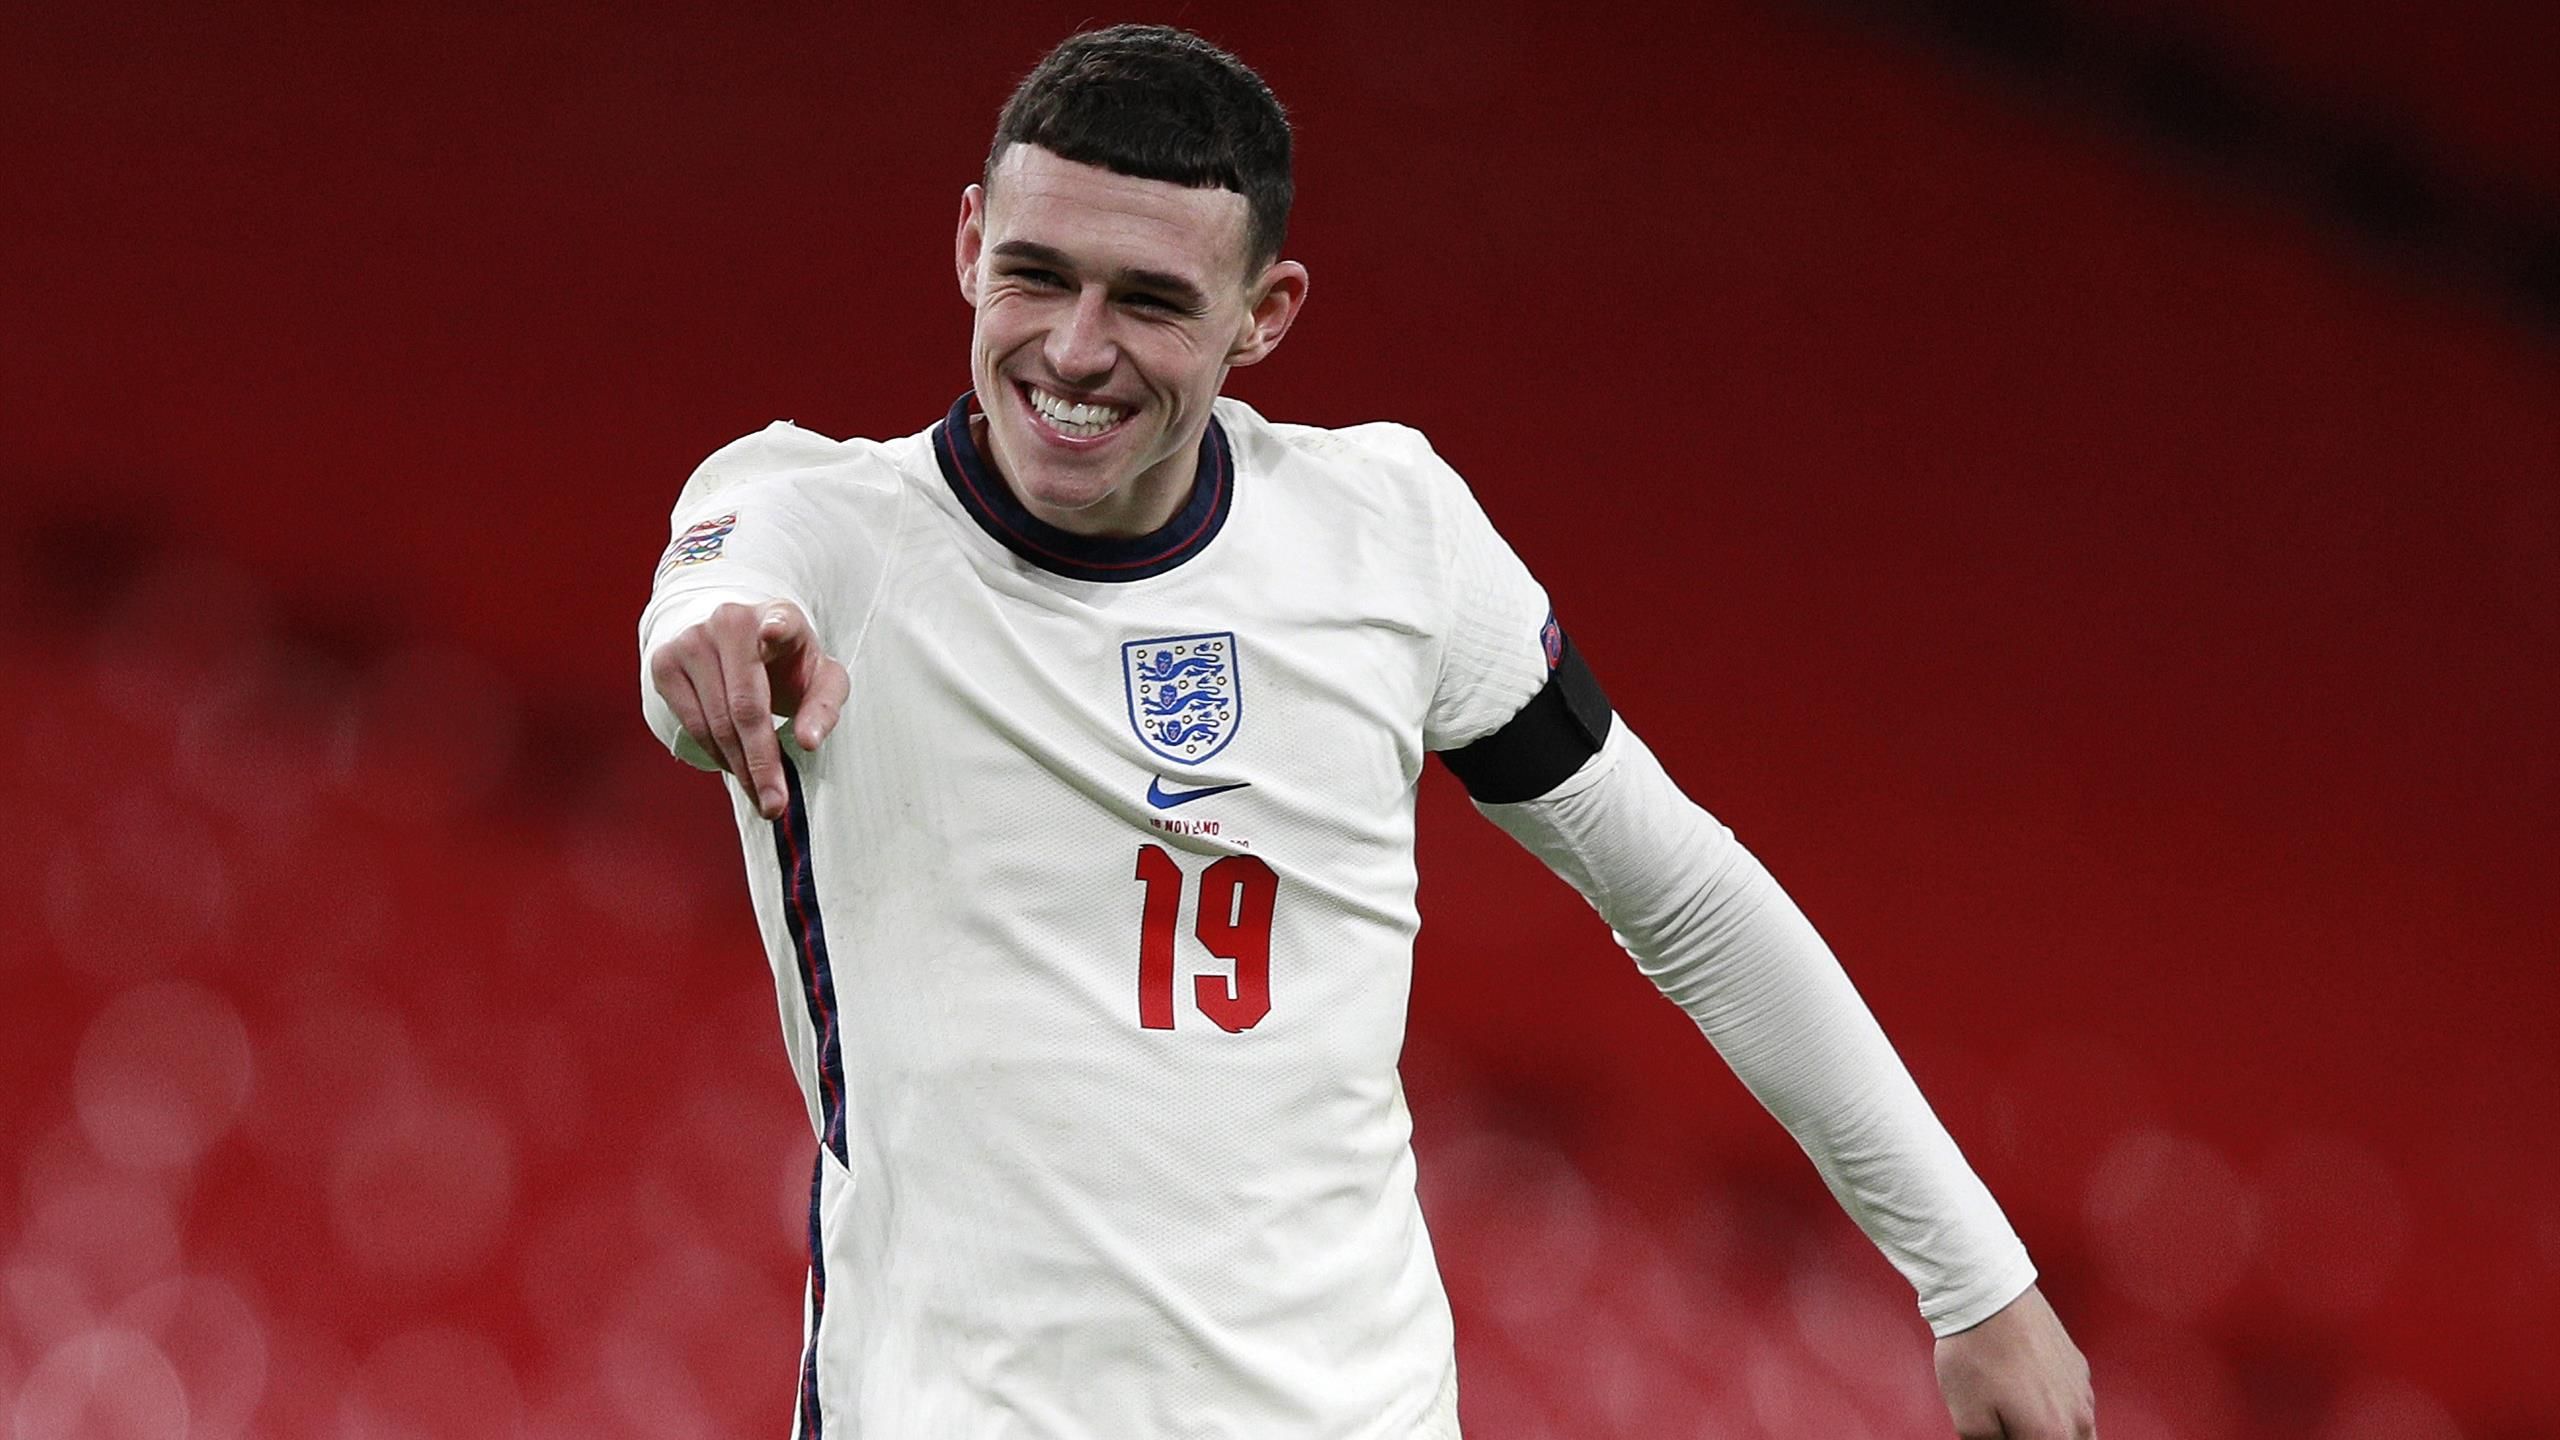 Phil Foden opens his England account in style